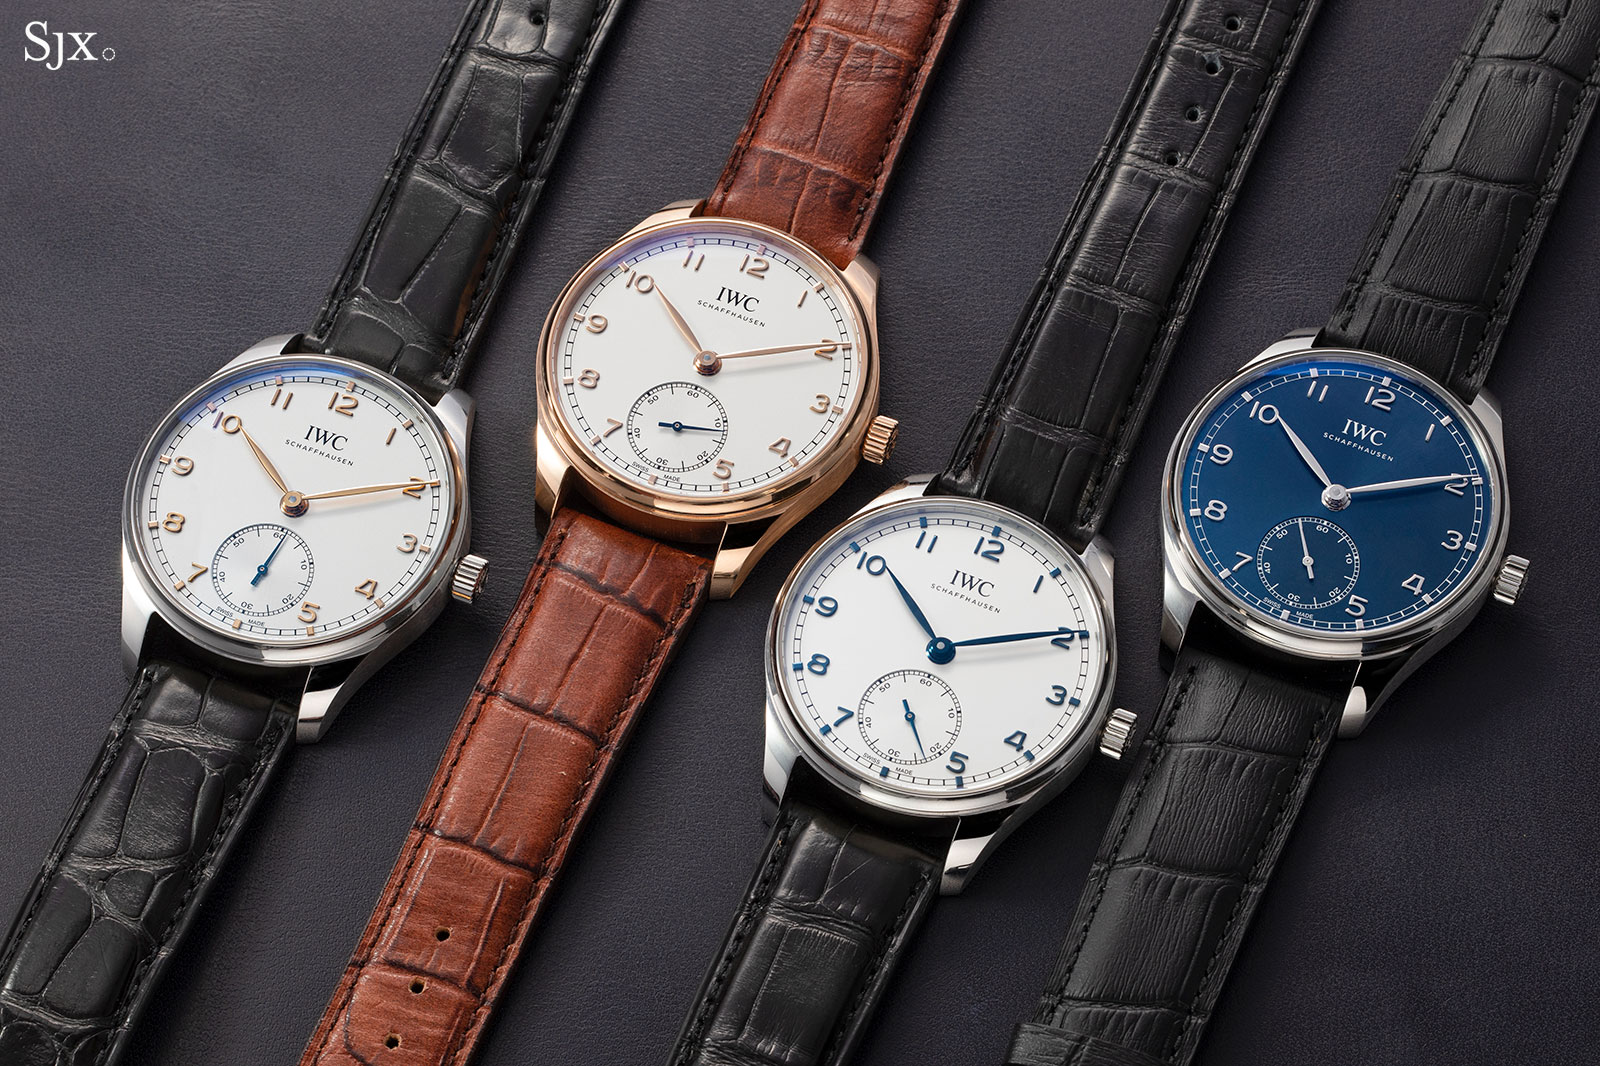 Iwc Portugieser Automatic Review | vlr.eng.br